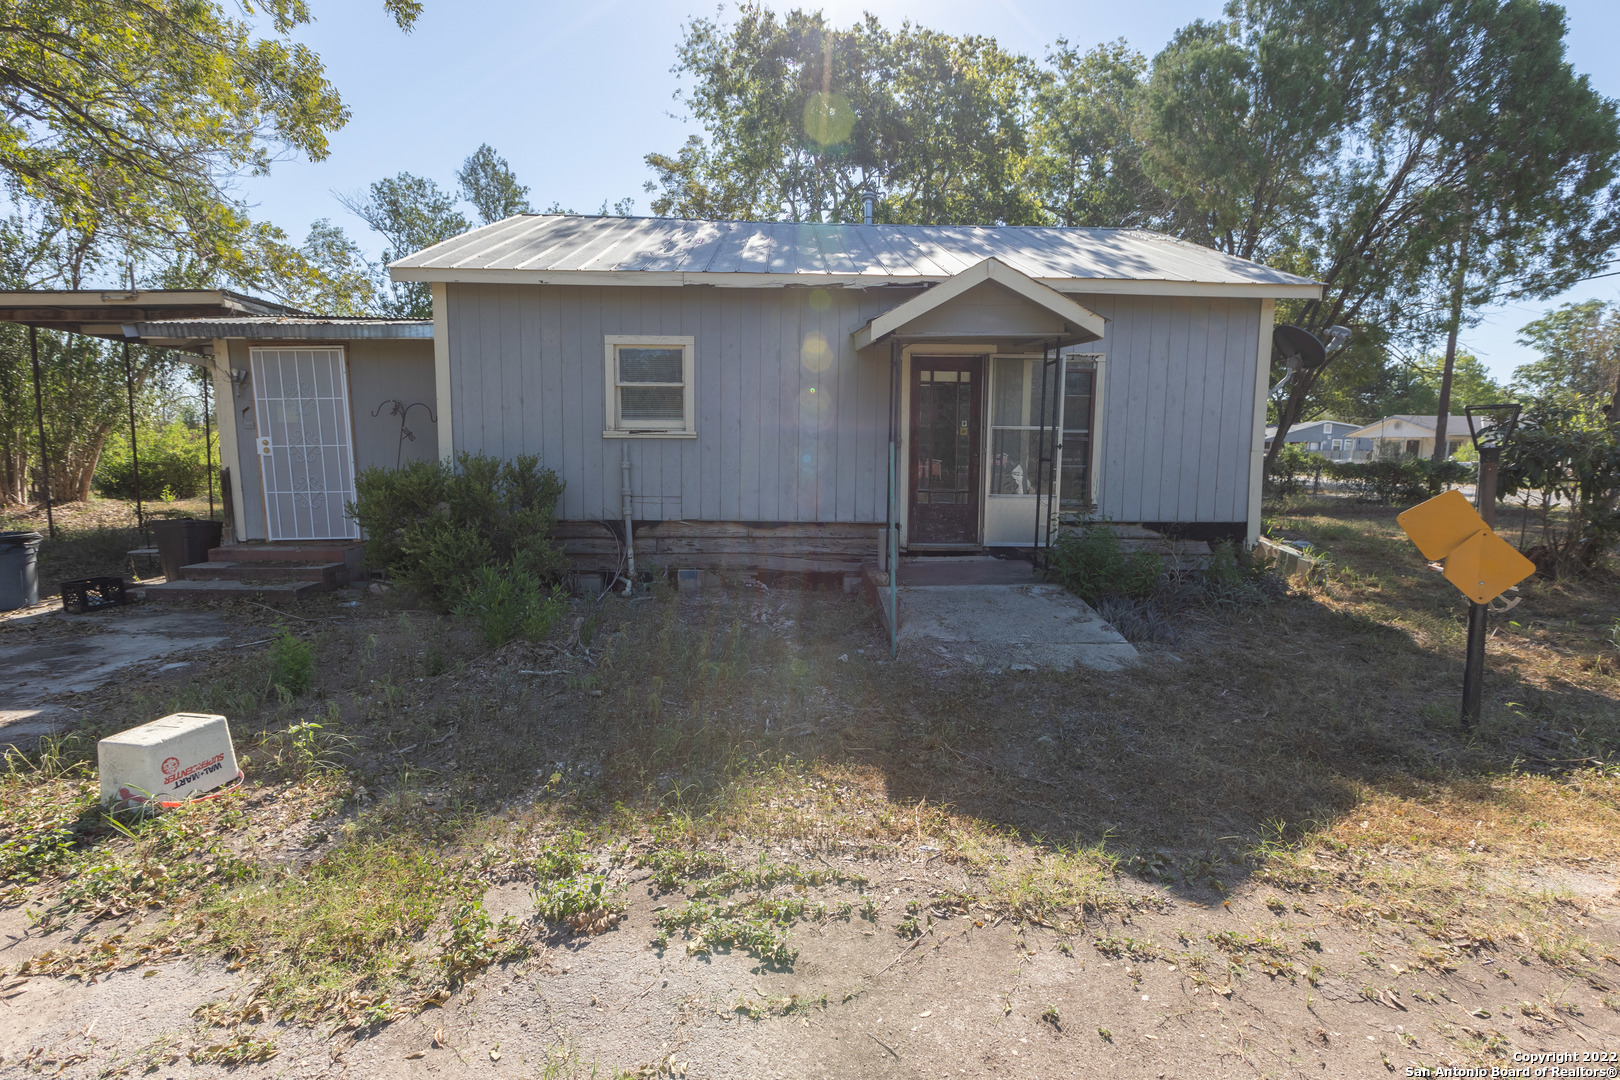 Incredible Historic 2 Bedroom, one bath home on over half an acre! This is the perfect project home or investor special with a large piece of Texas waiting for you! It has great potential sitting on a large lot for the privacy you deserve.